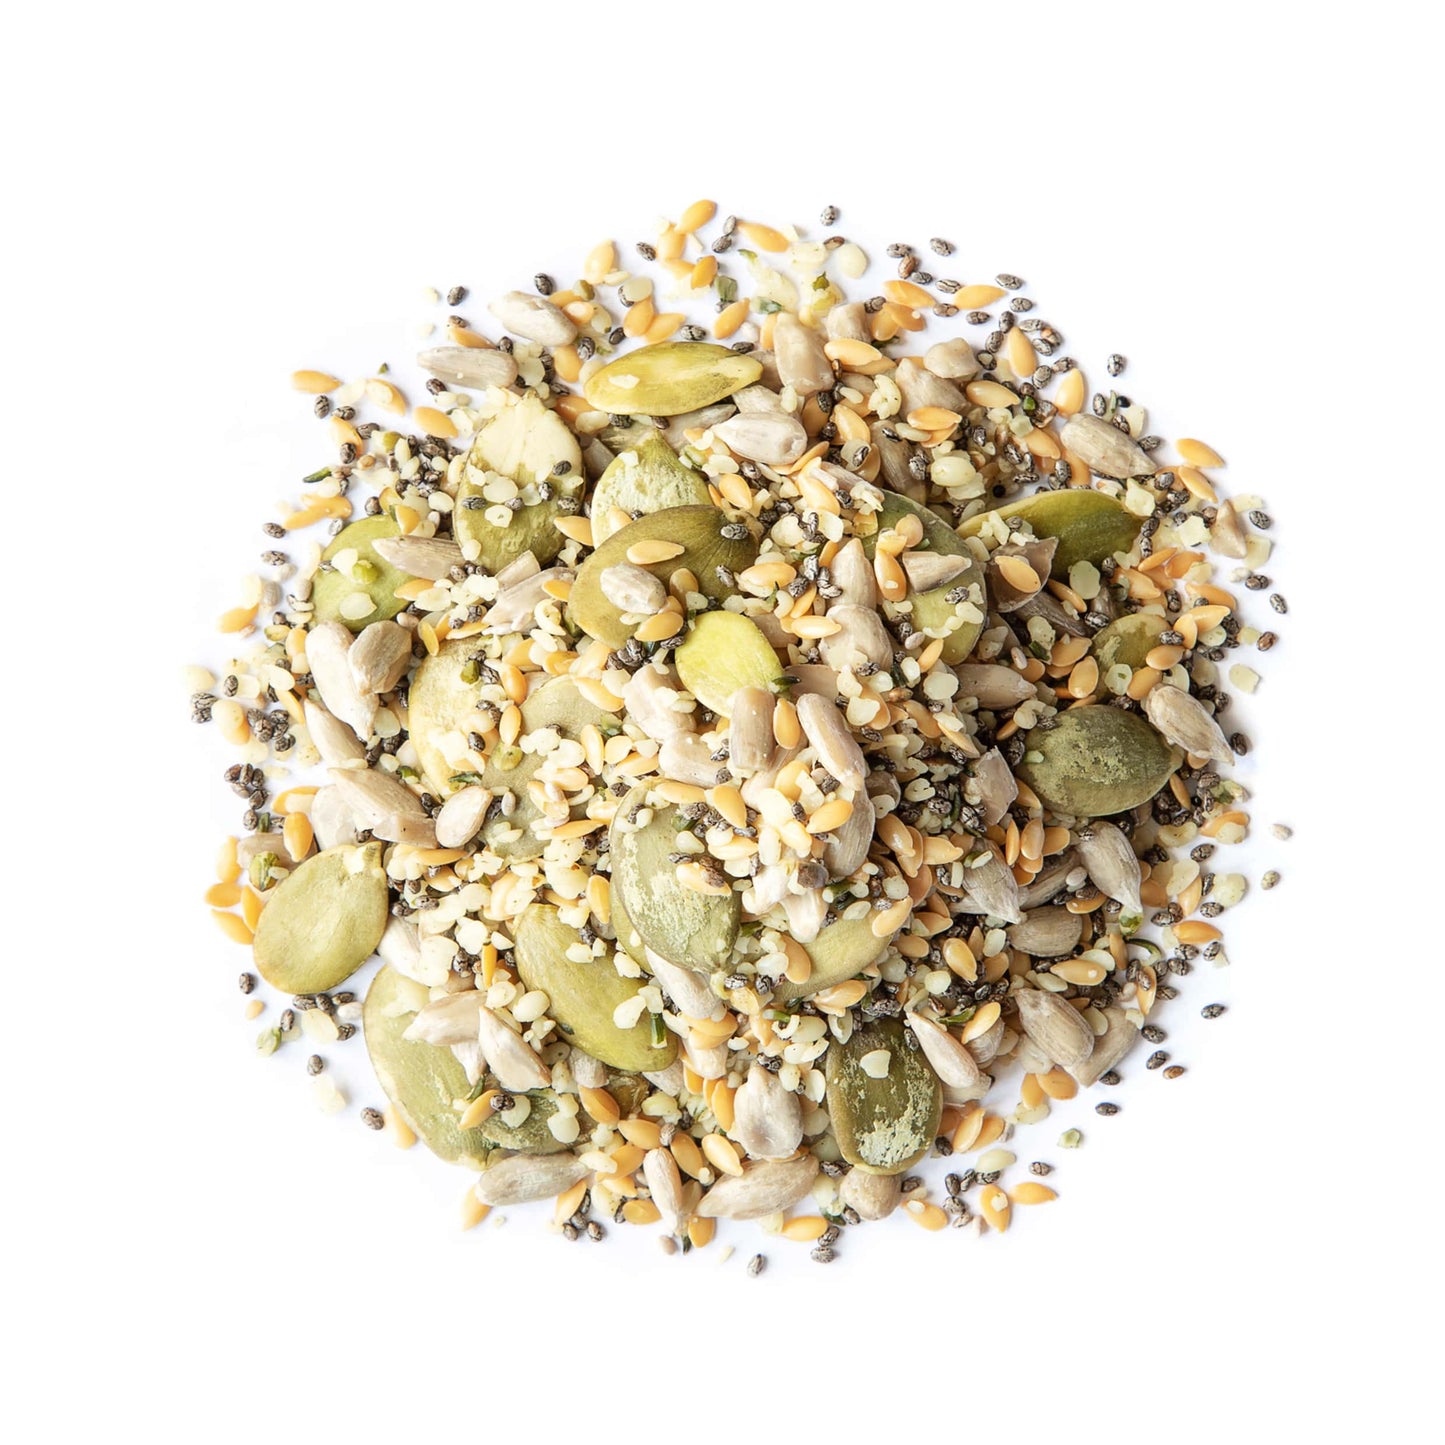 Organic Raw Superseed Mix with Chia, Flax, Hemp, Pumpkin, and Sunflower — Non-GMO Five Whole Seeds Blend, Vegan, Kosher, Bulk. High in Omega-3, Omega-6, Fiber, Protein. Perfect Salad Topper